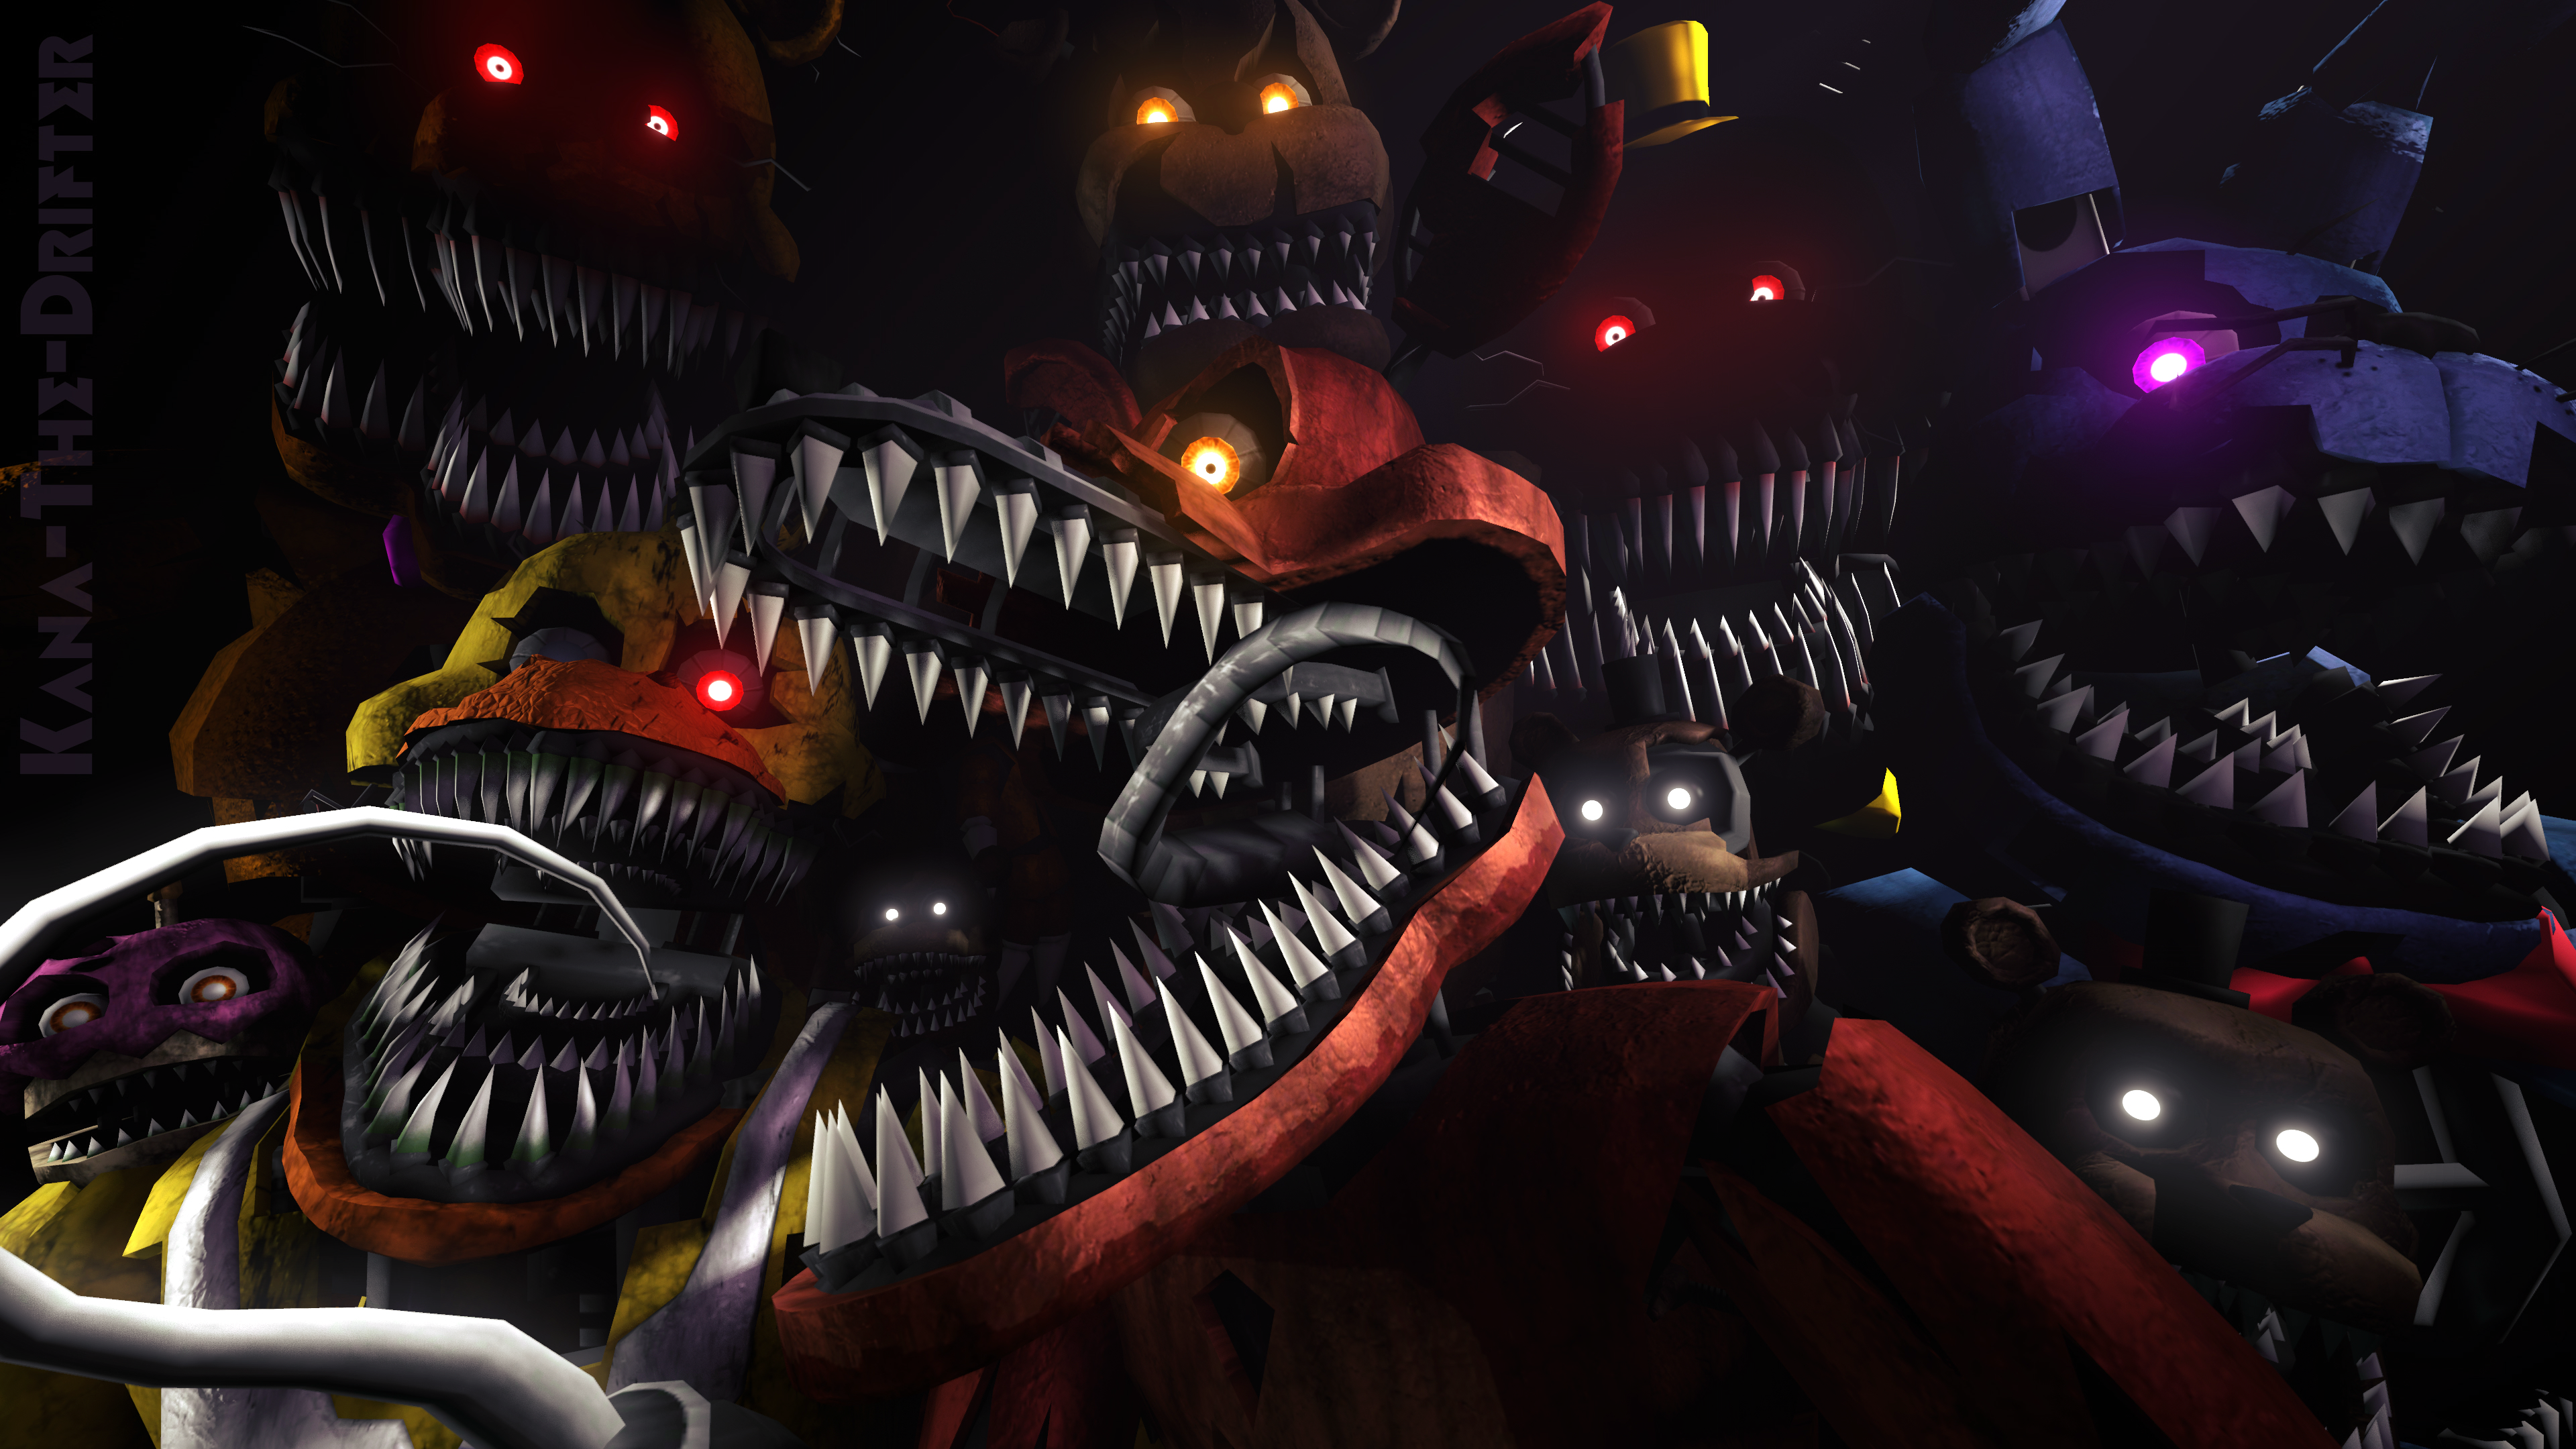 Video Game Five Nights At Freddy 039 S 4 3840x2160